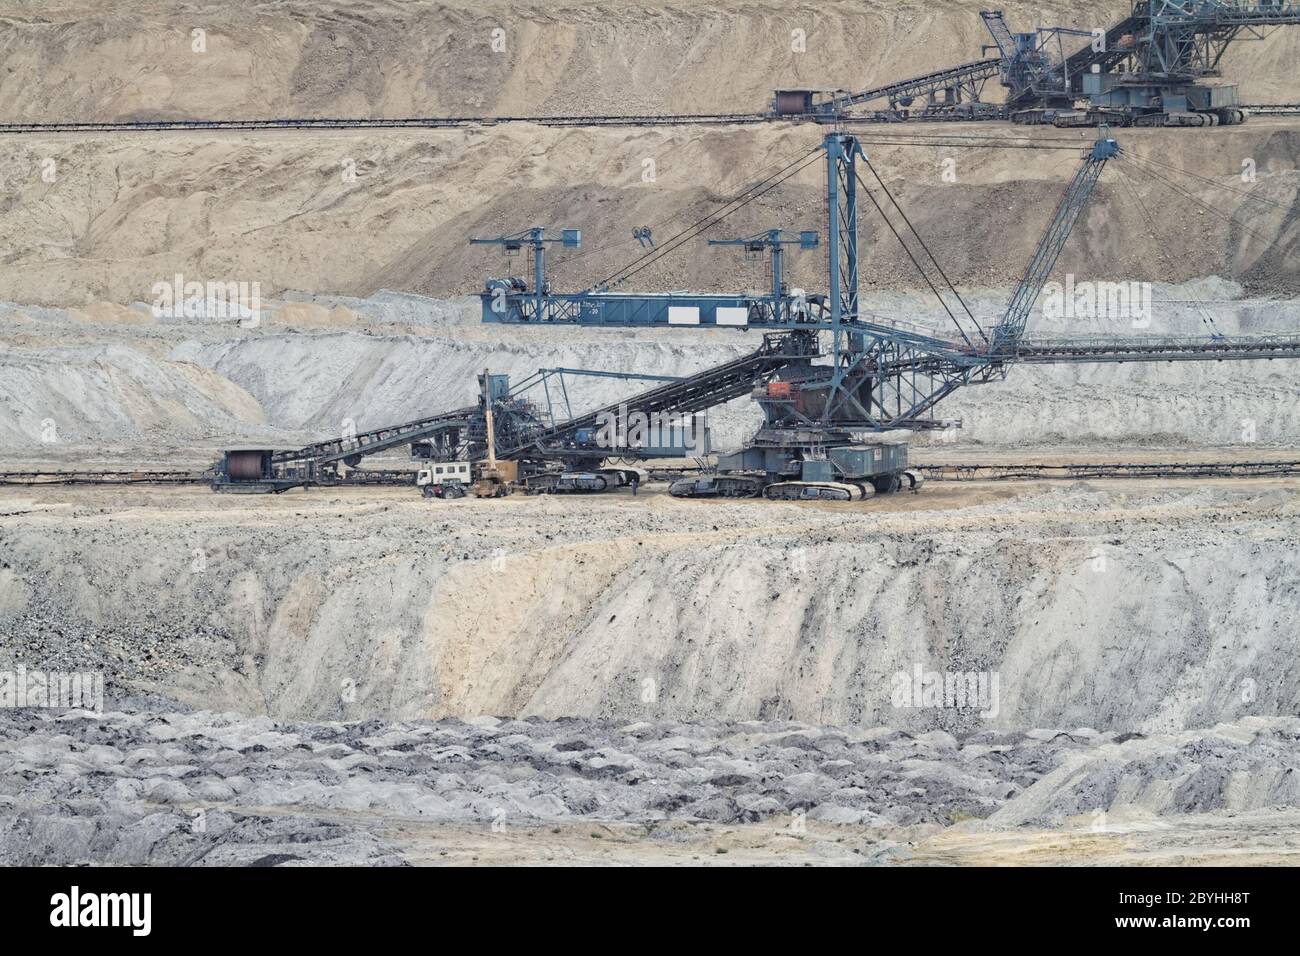 Coal mining in an open pit Stock Photo